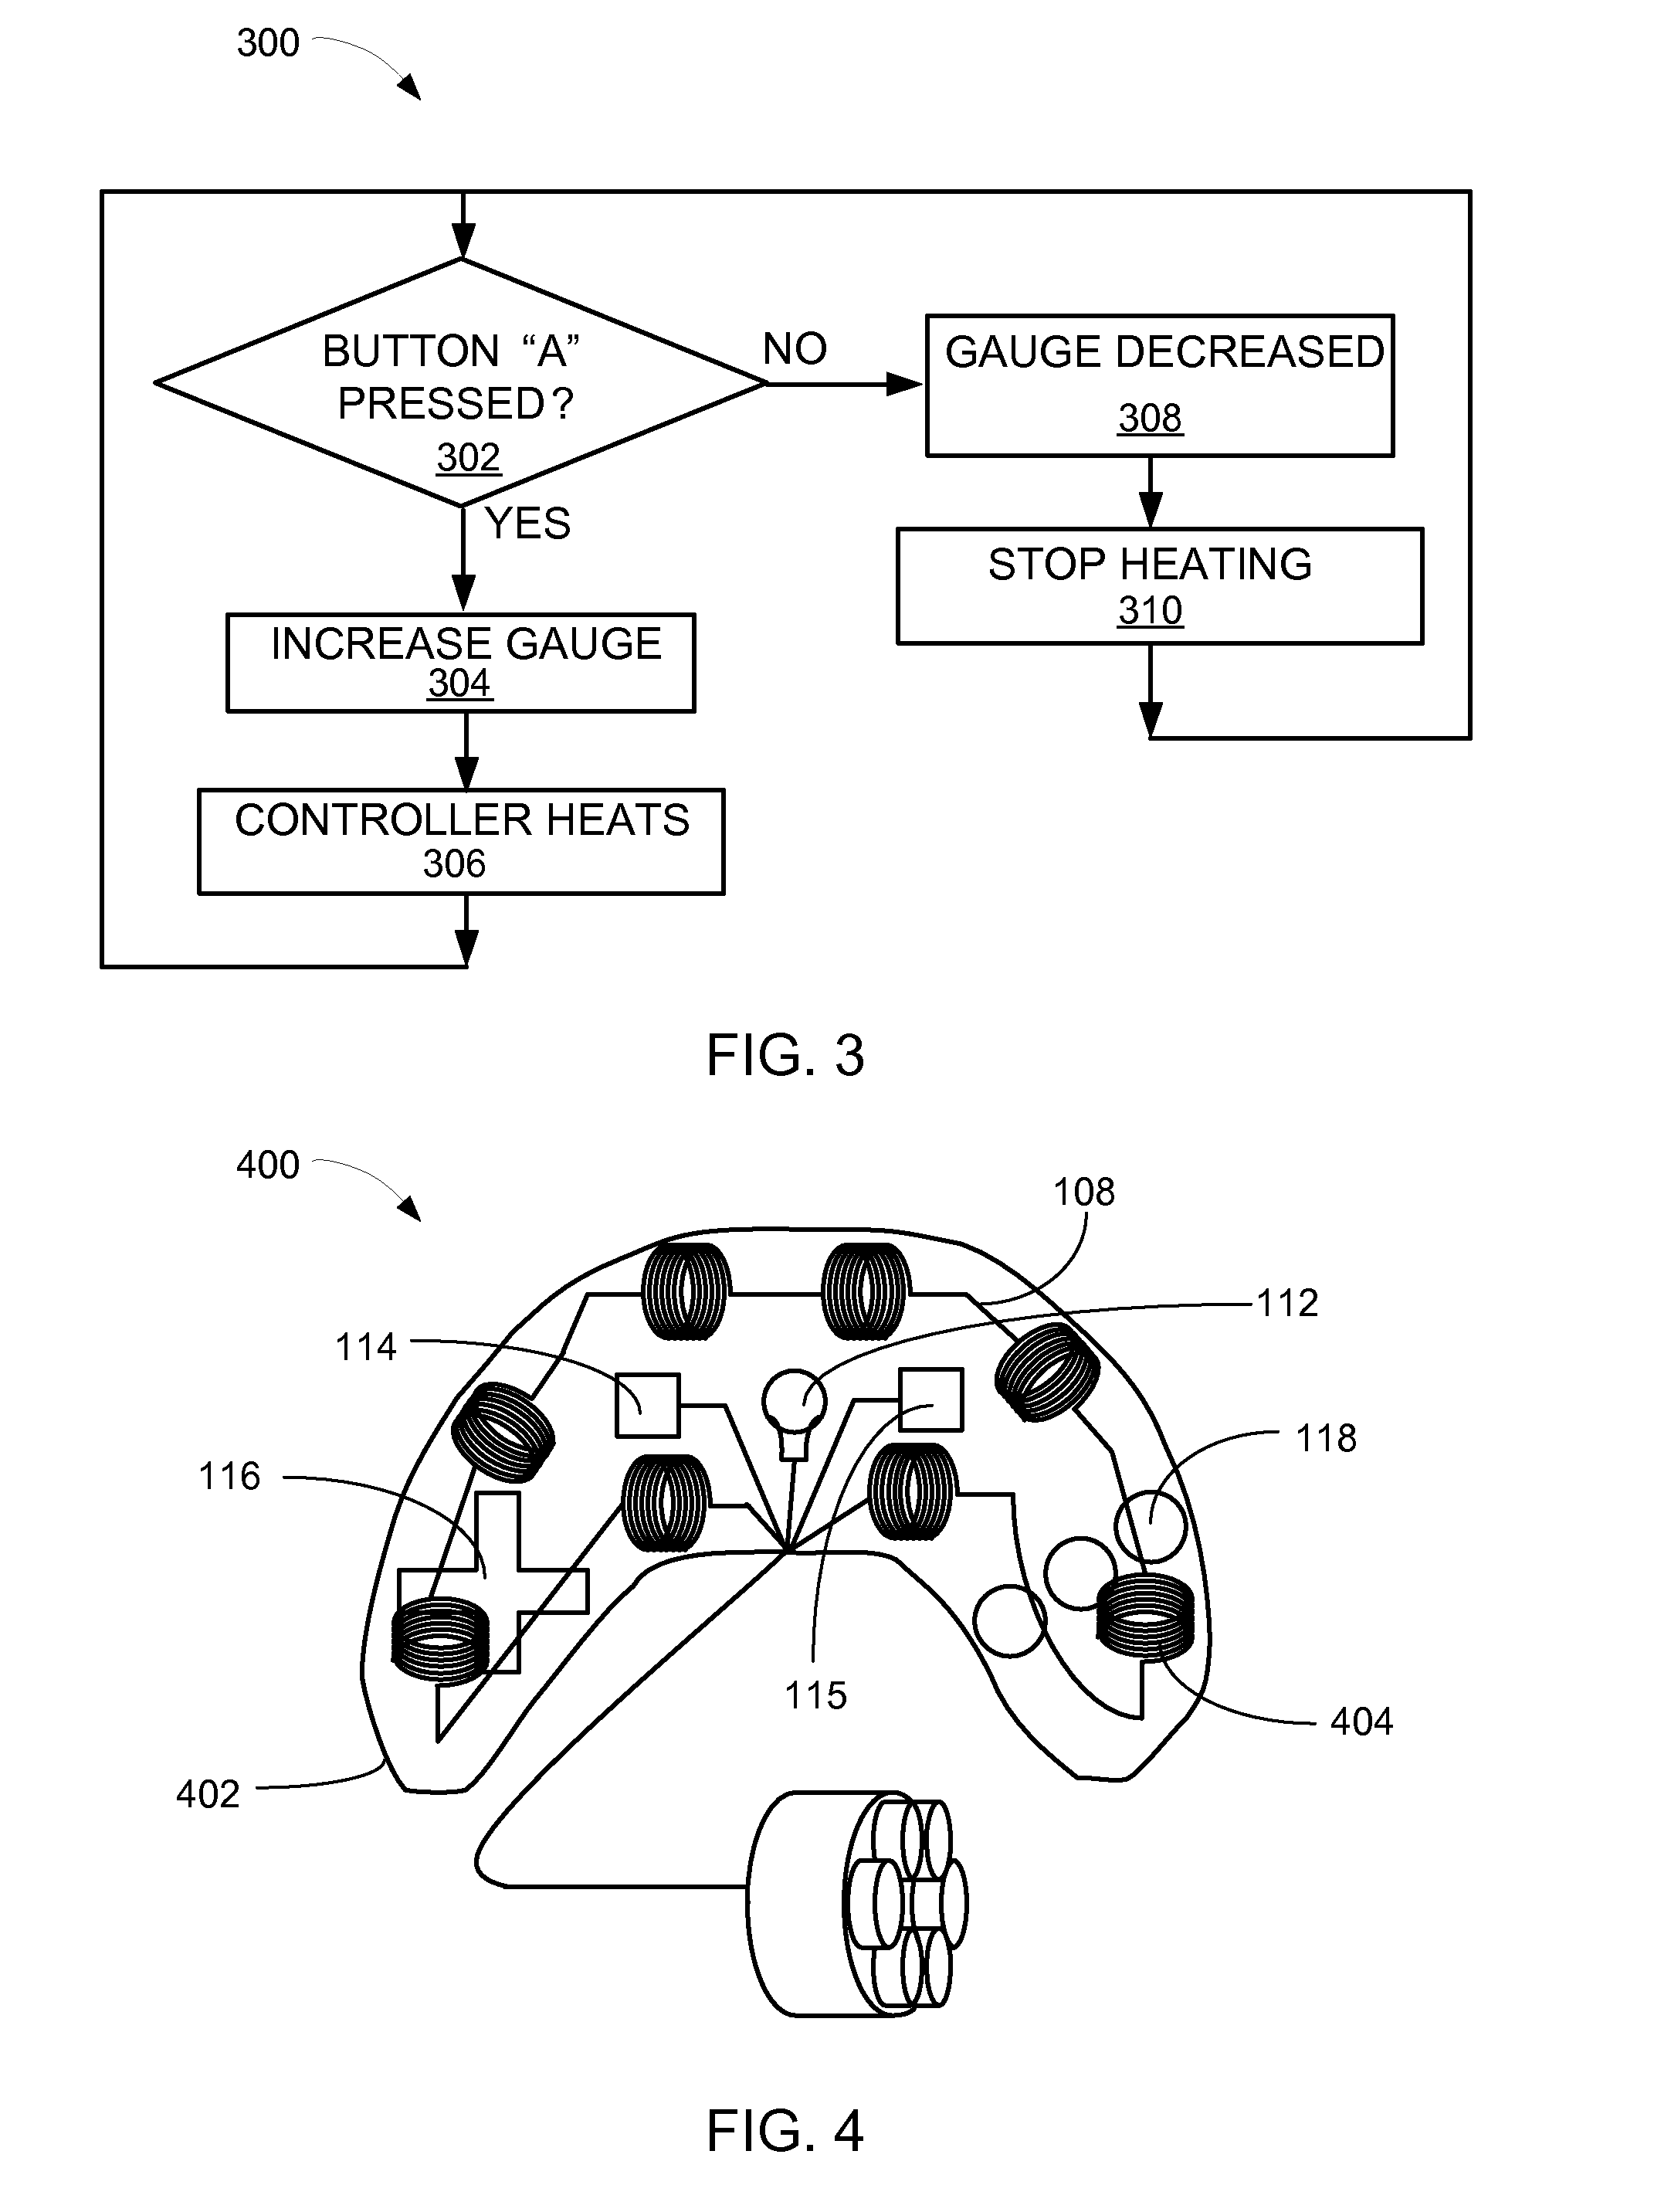 Haptic interface system for video systems